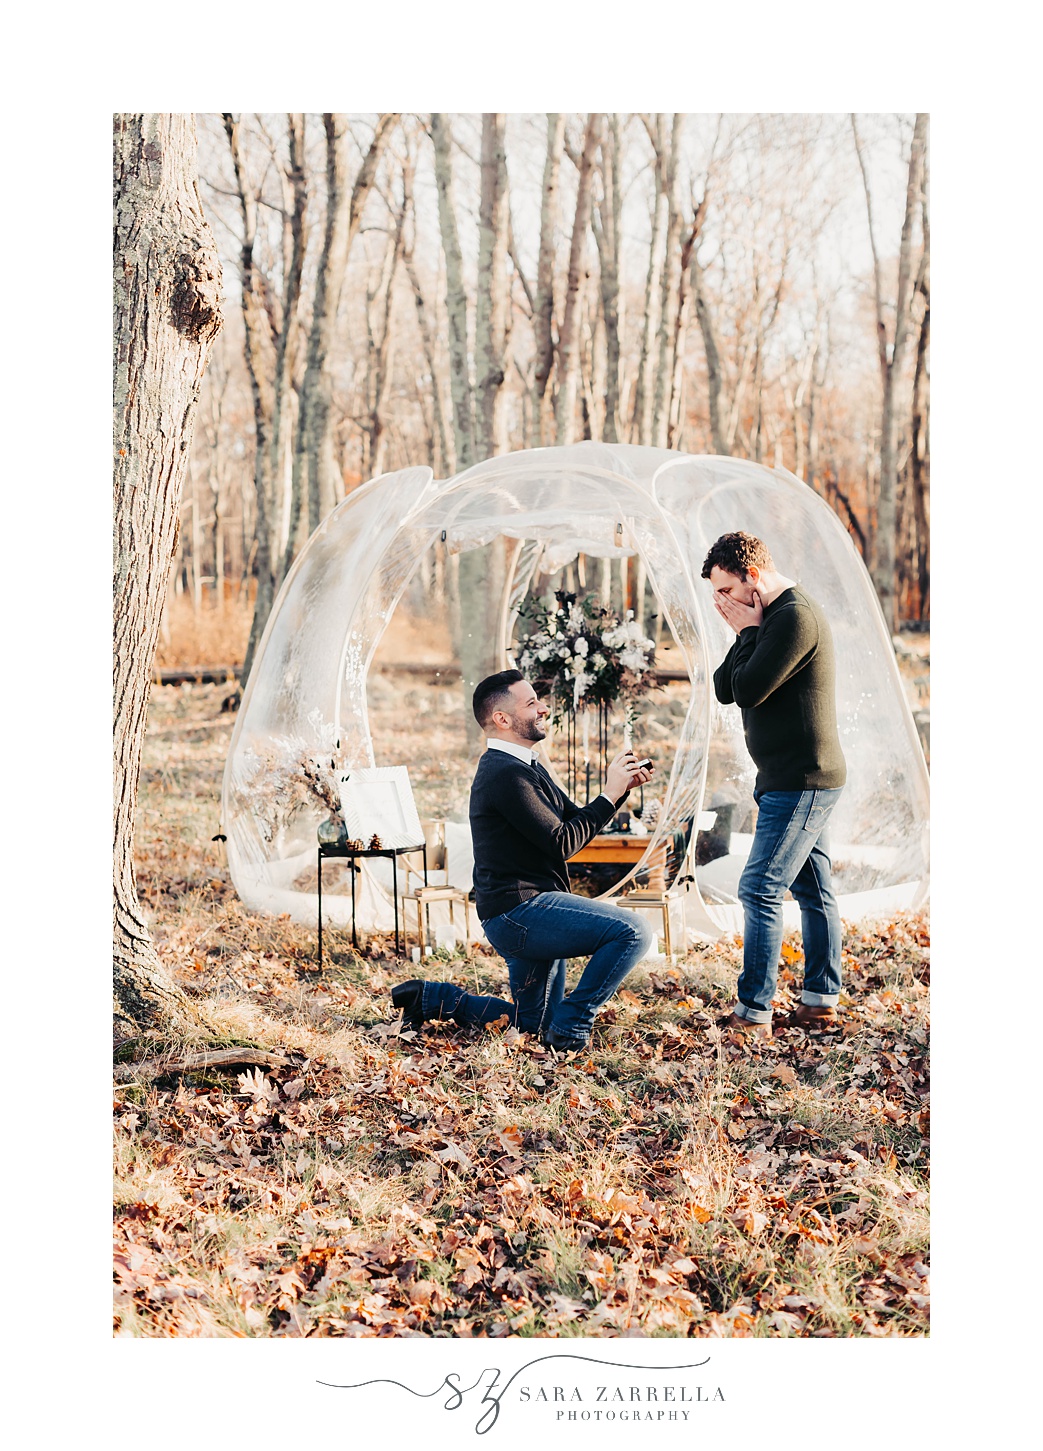 man proposes to boyfriend during intimate Gerald's Farm proposal